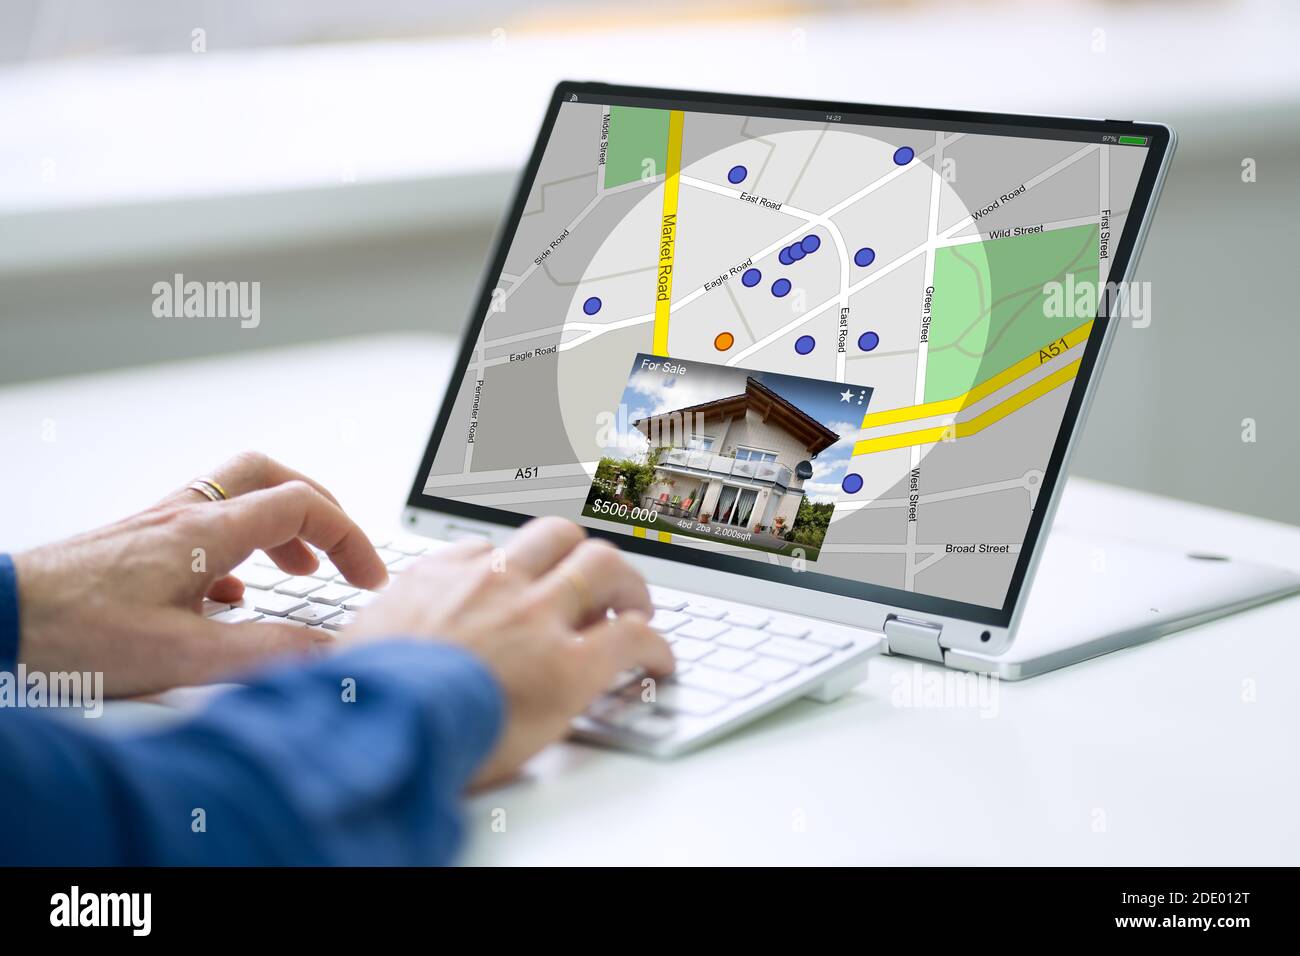 GPS Location Map Search Online On Laptop Stock Photo -